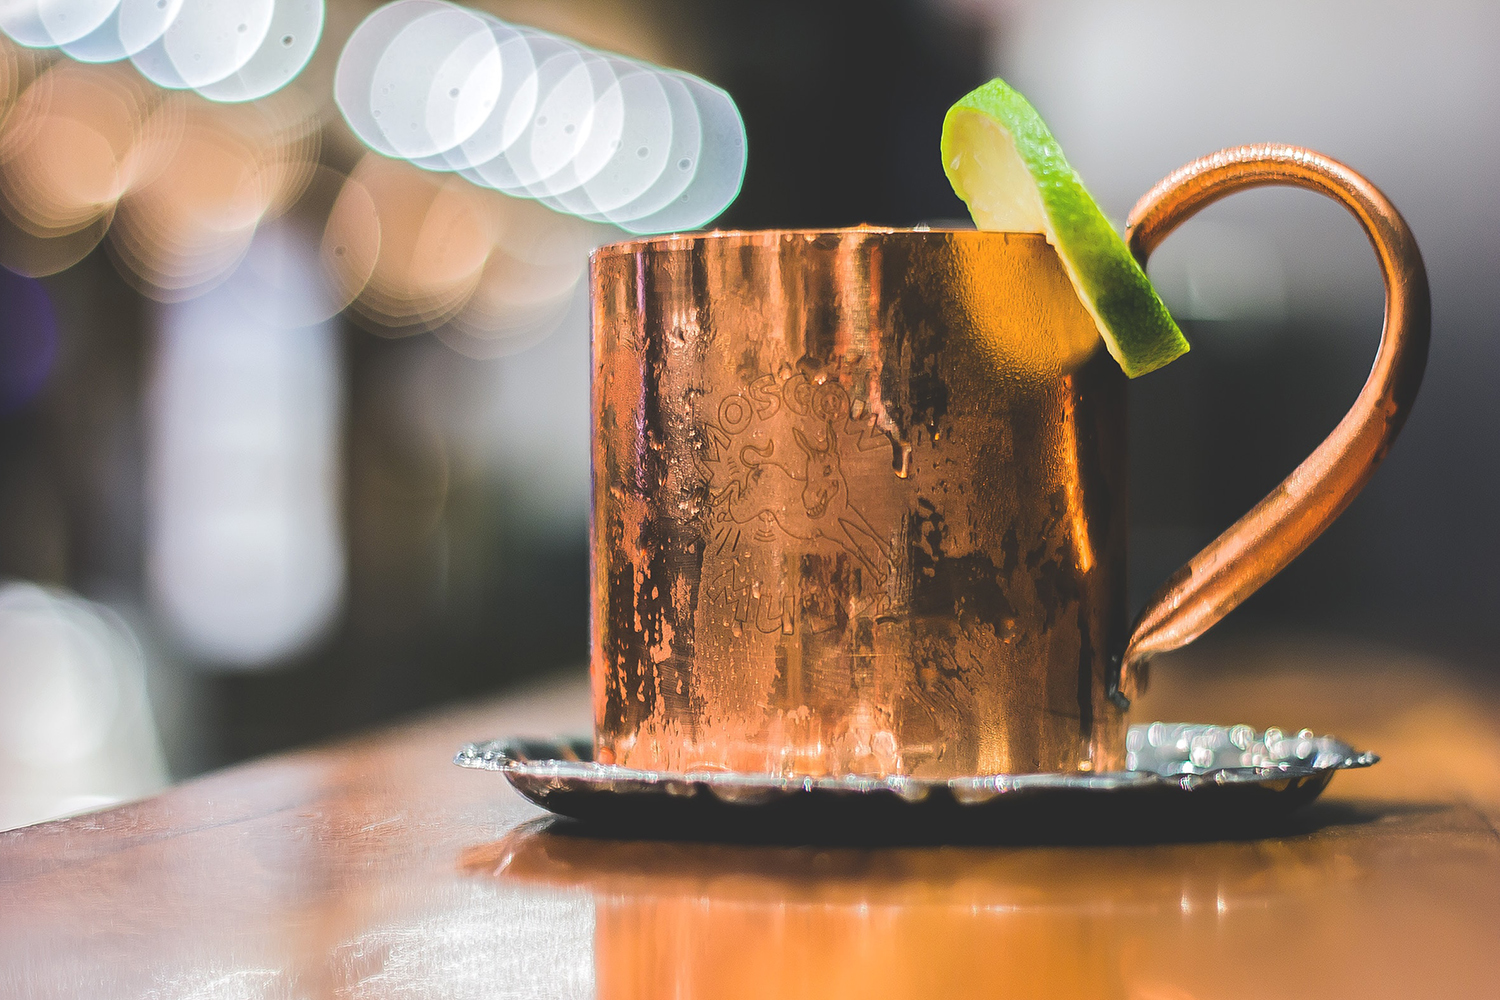  How To Make a Proper Moscow Mule